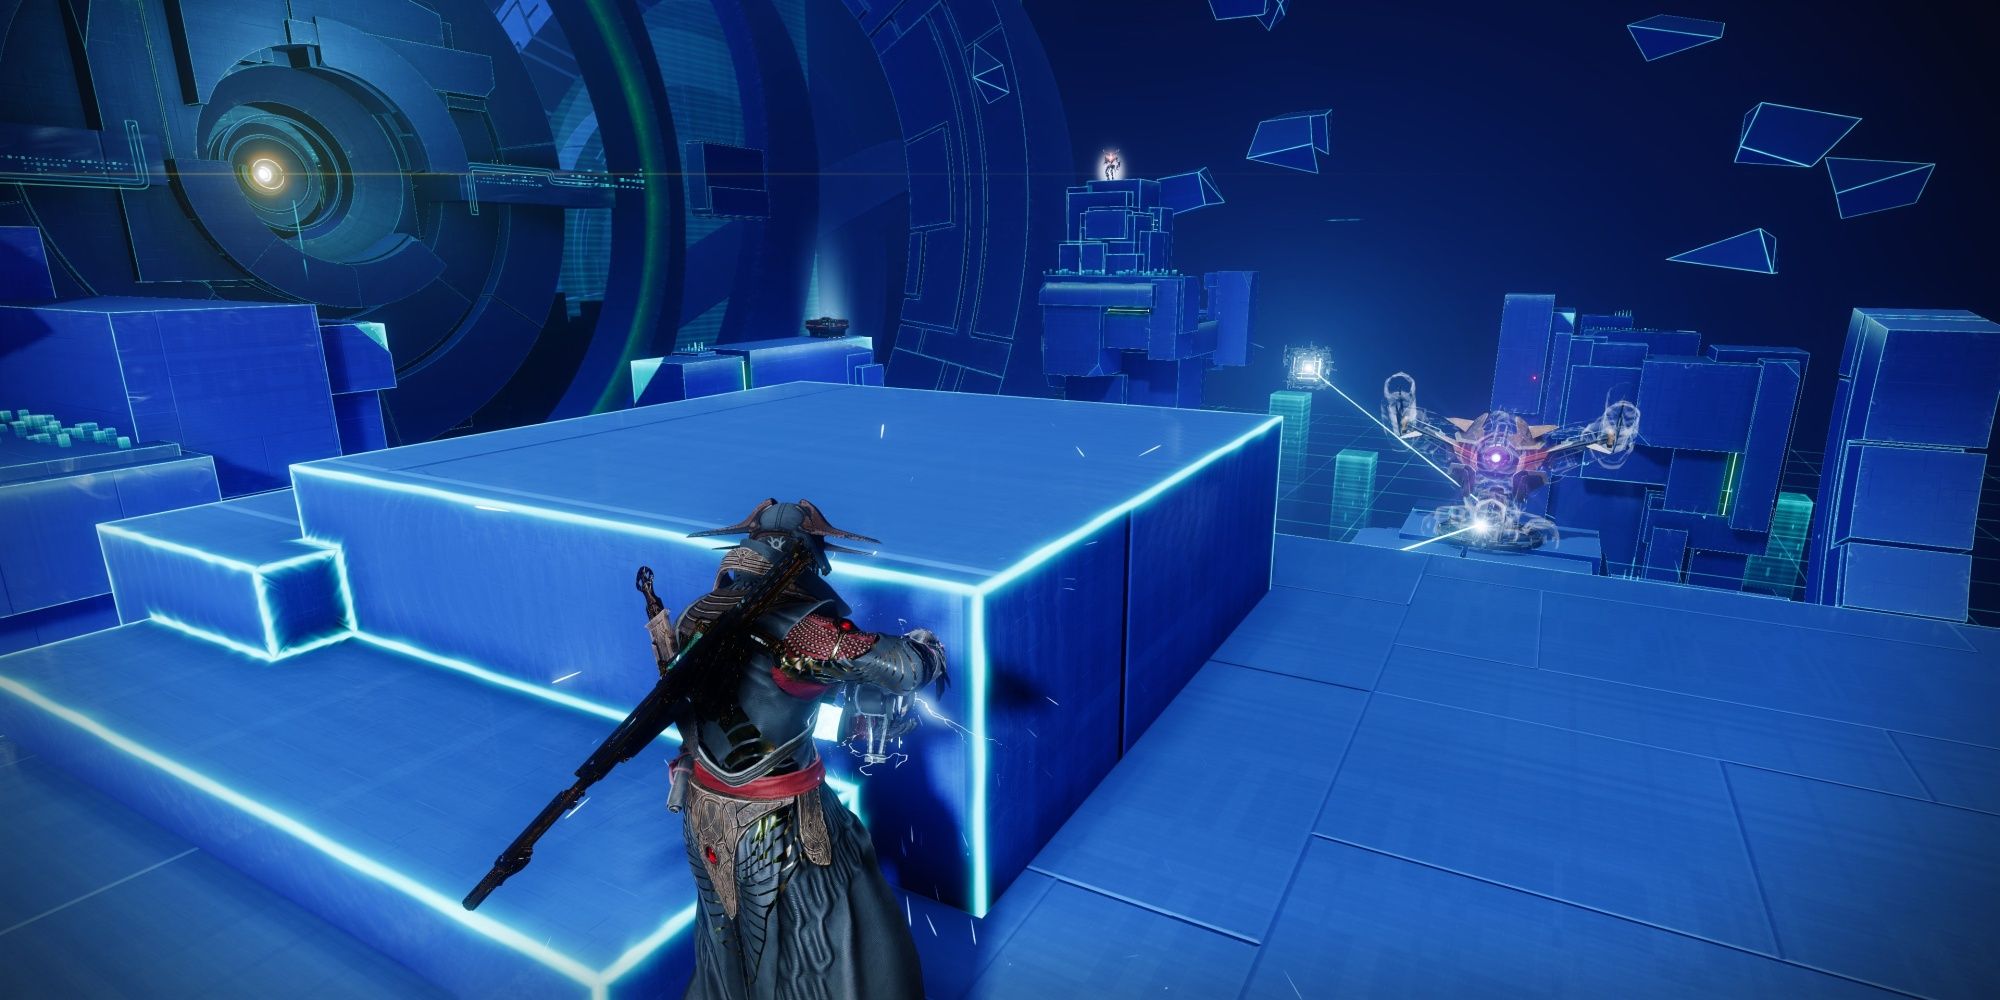 Destiny 2 Thrilladome Boss Arena Taking Cover From Cyclops